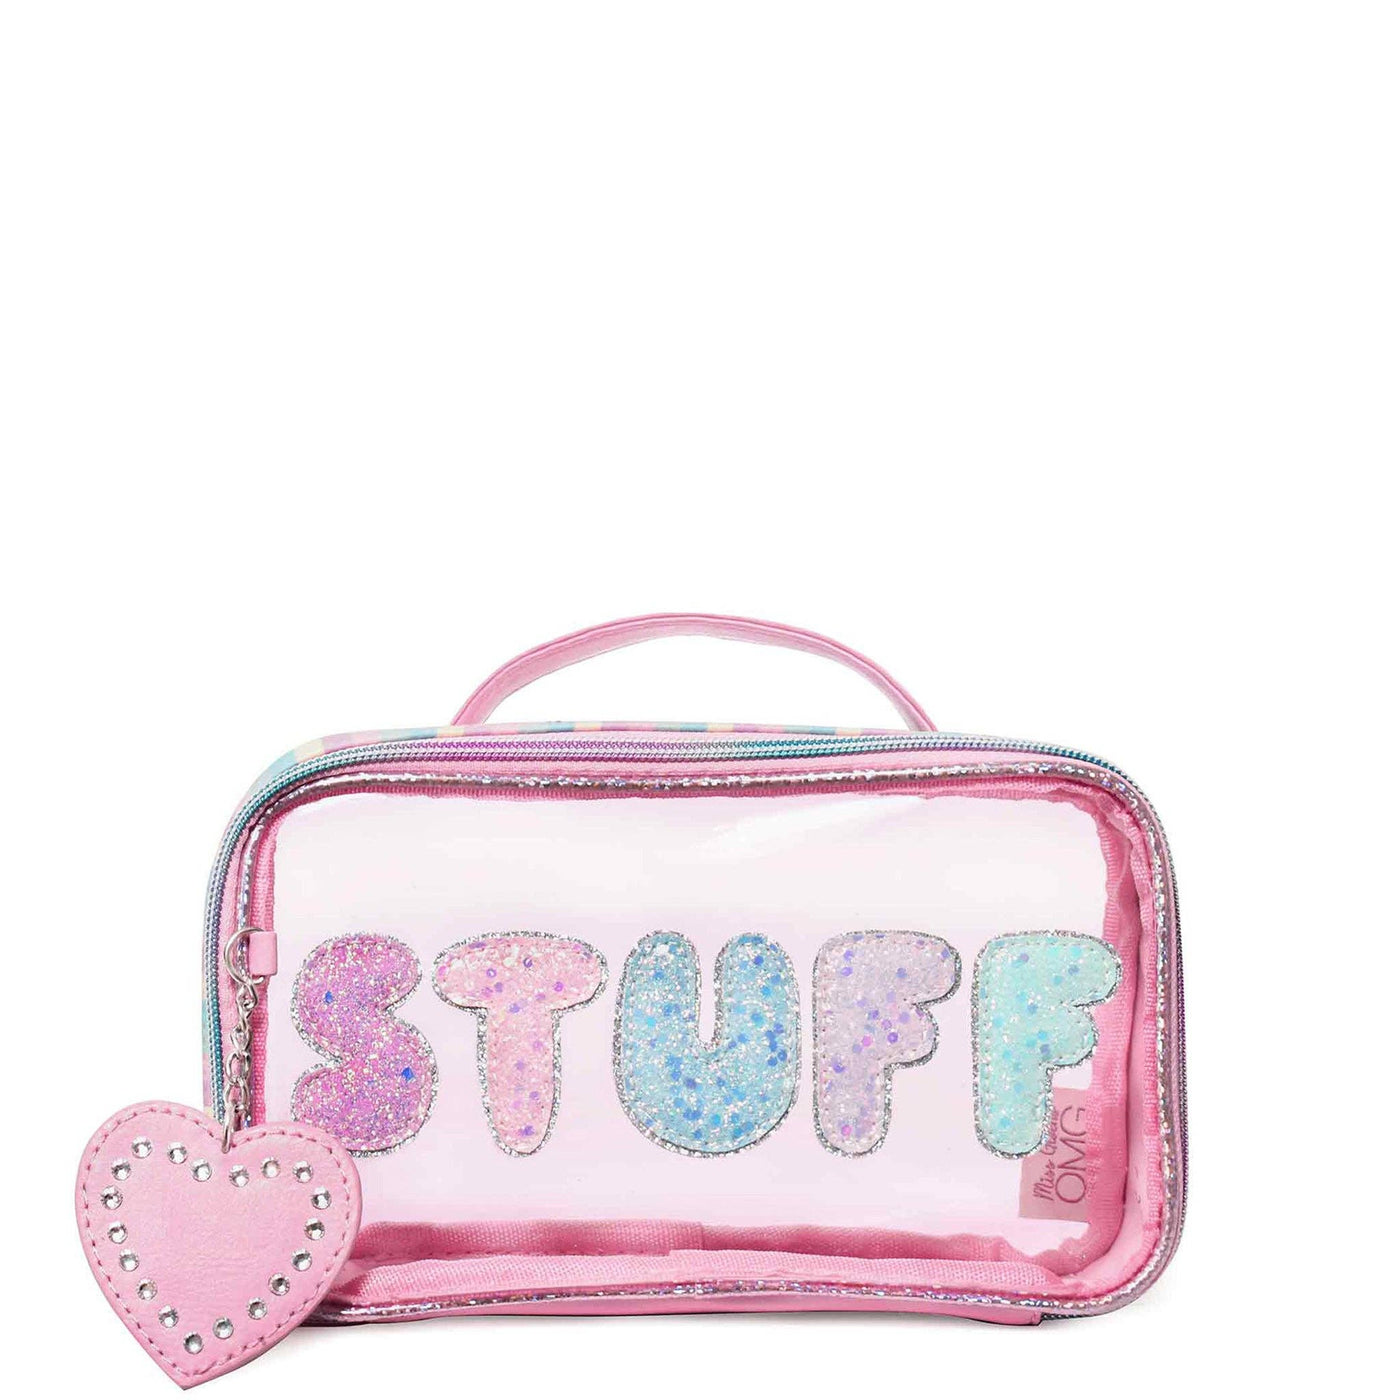 Miss Gwen's OMG Accessories - 'Stuff' Clear Top-Handle Pouch